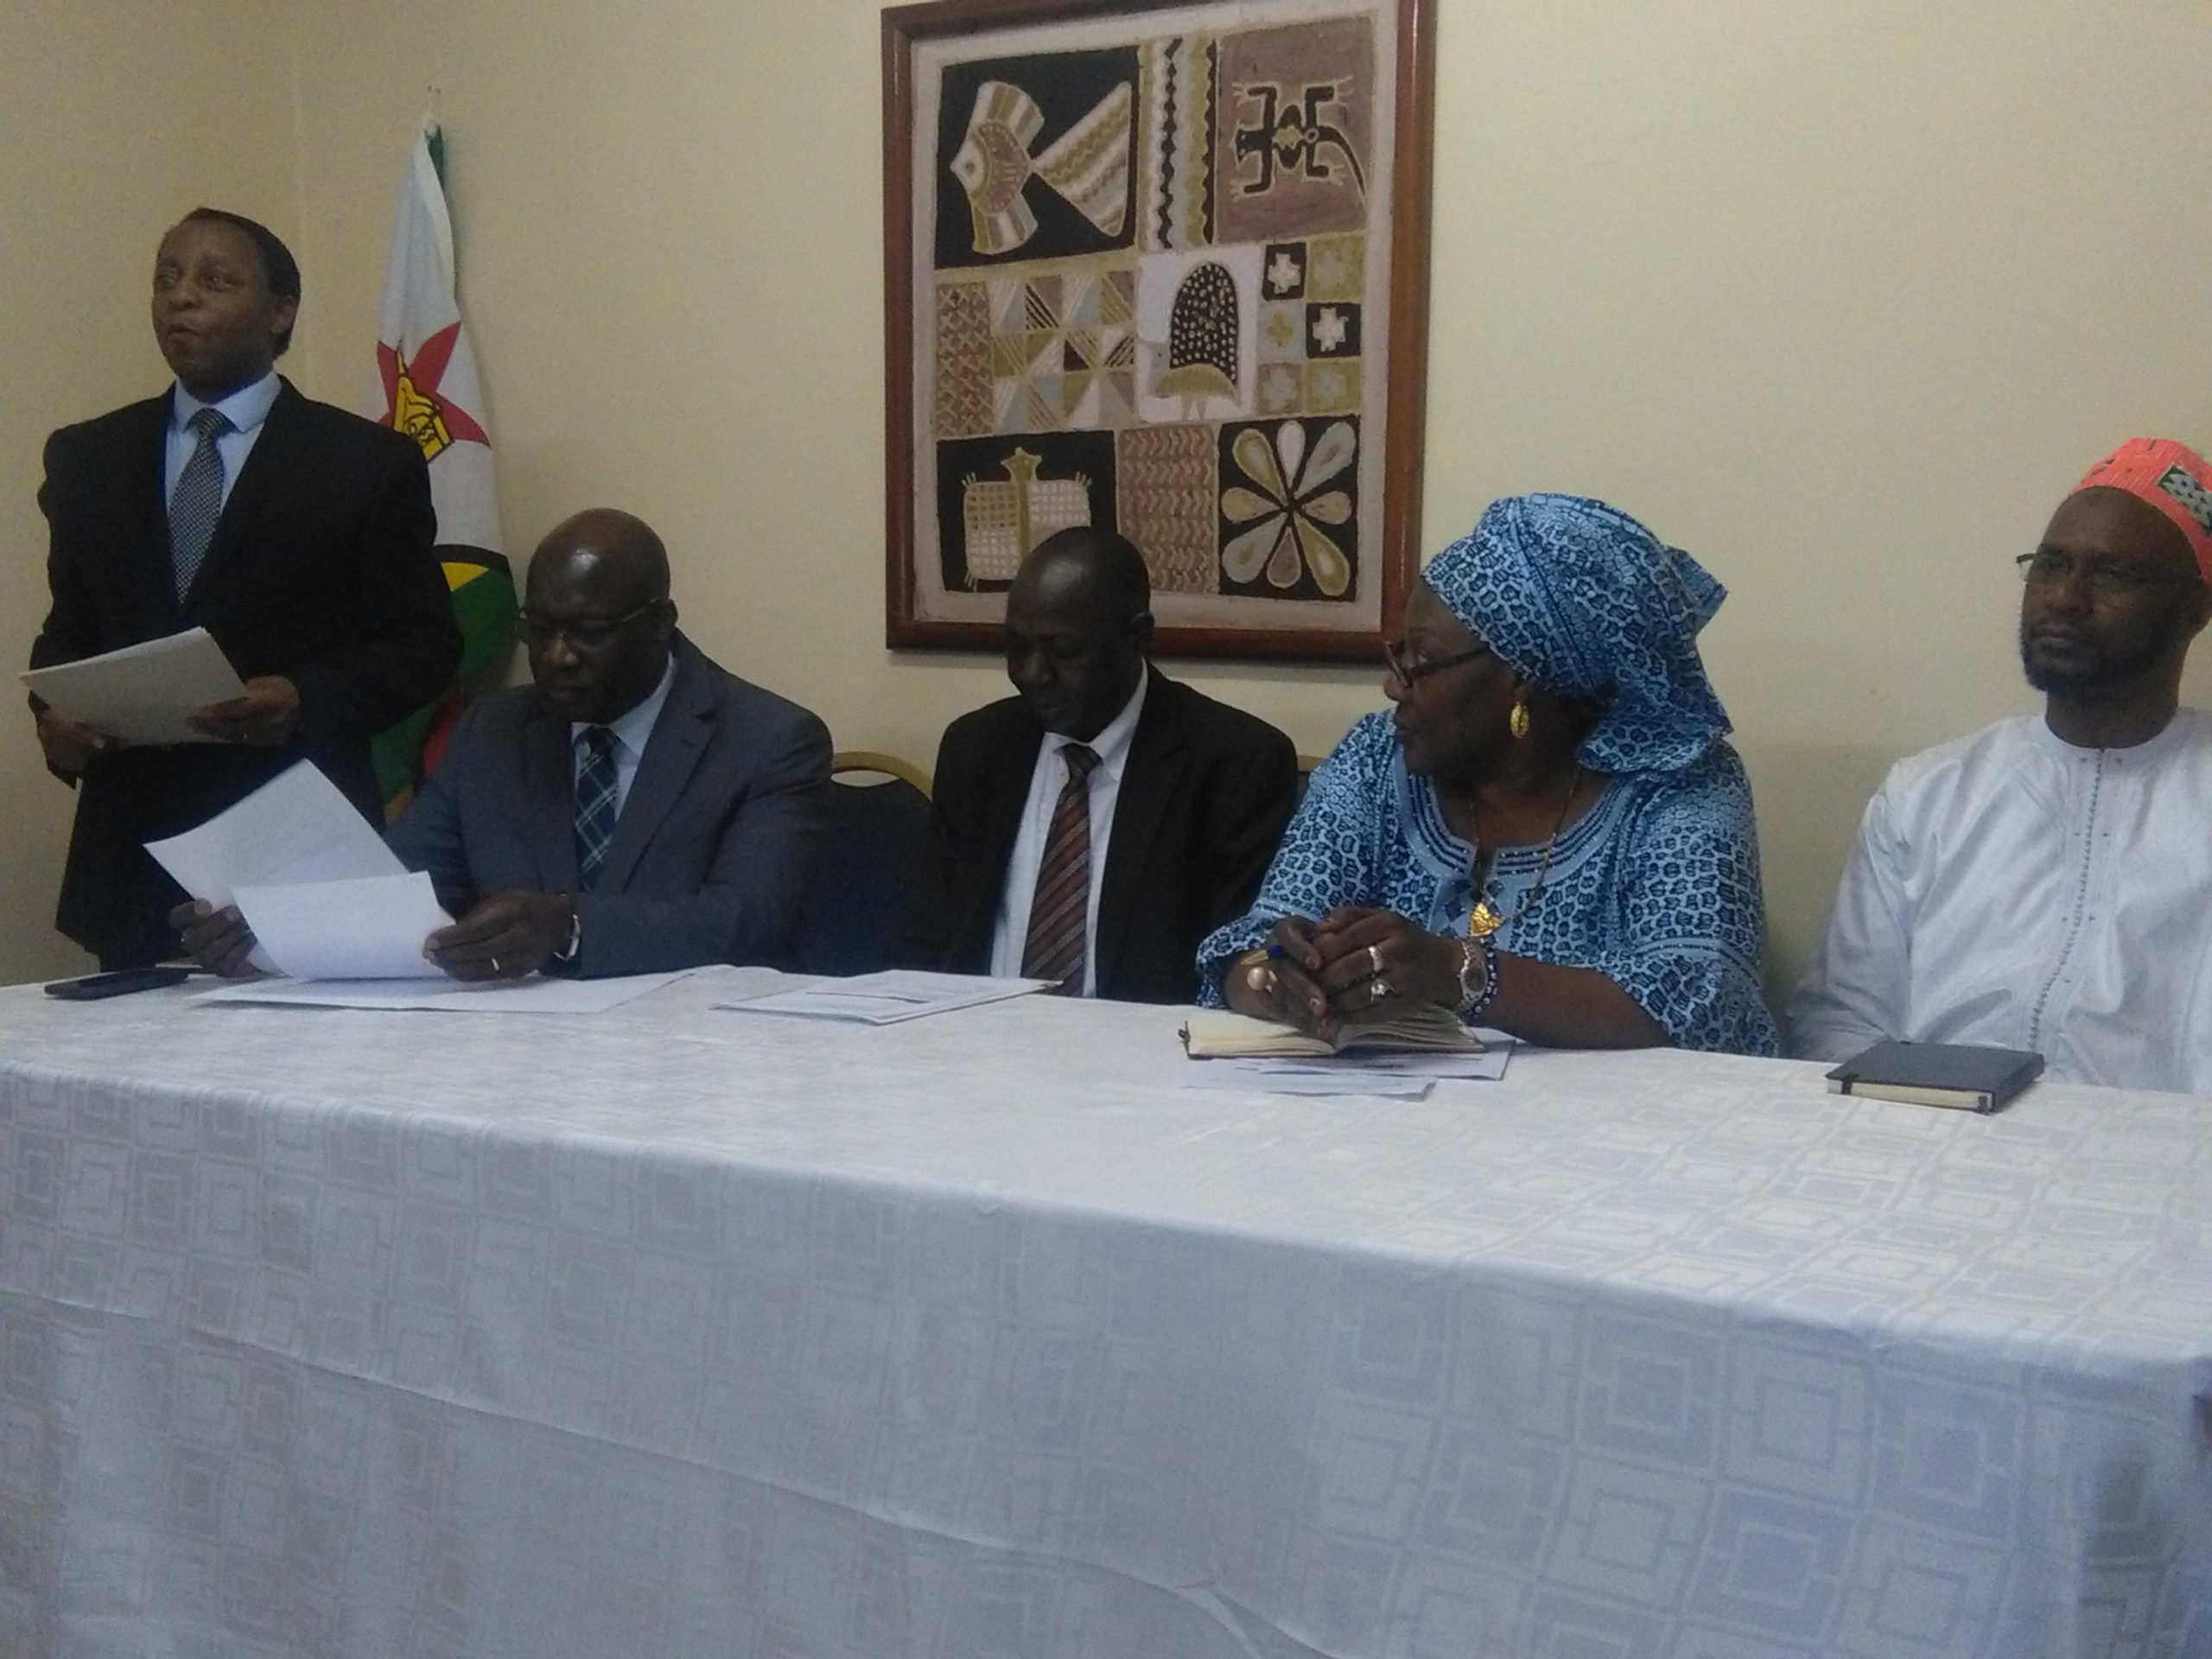 Zim Results Based Financing to guide Gambians on implementing MCNH Project